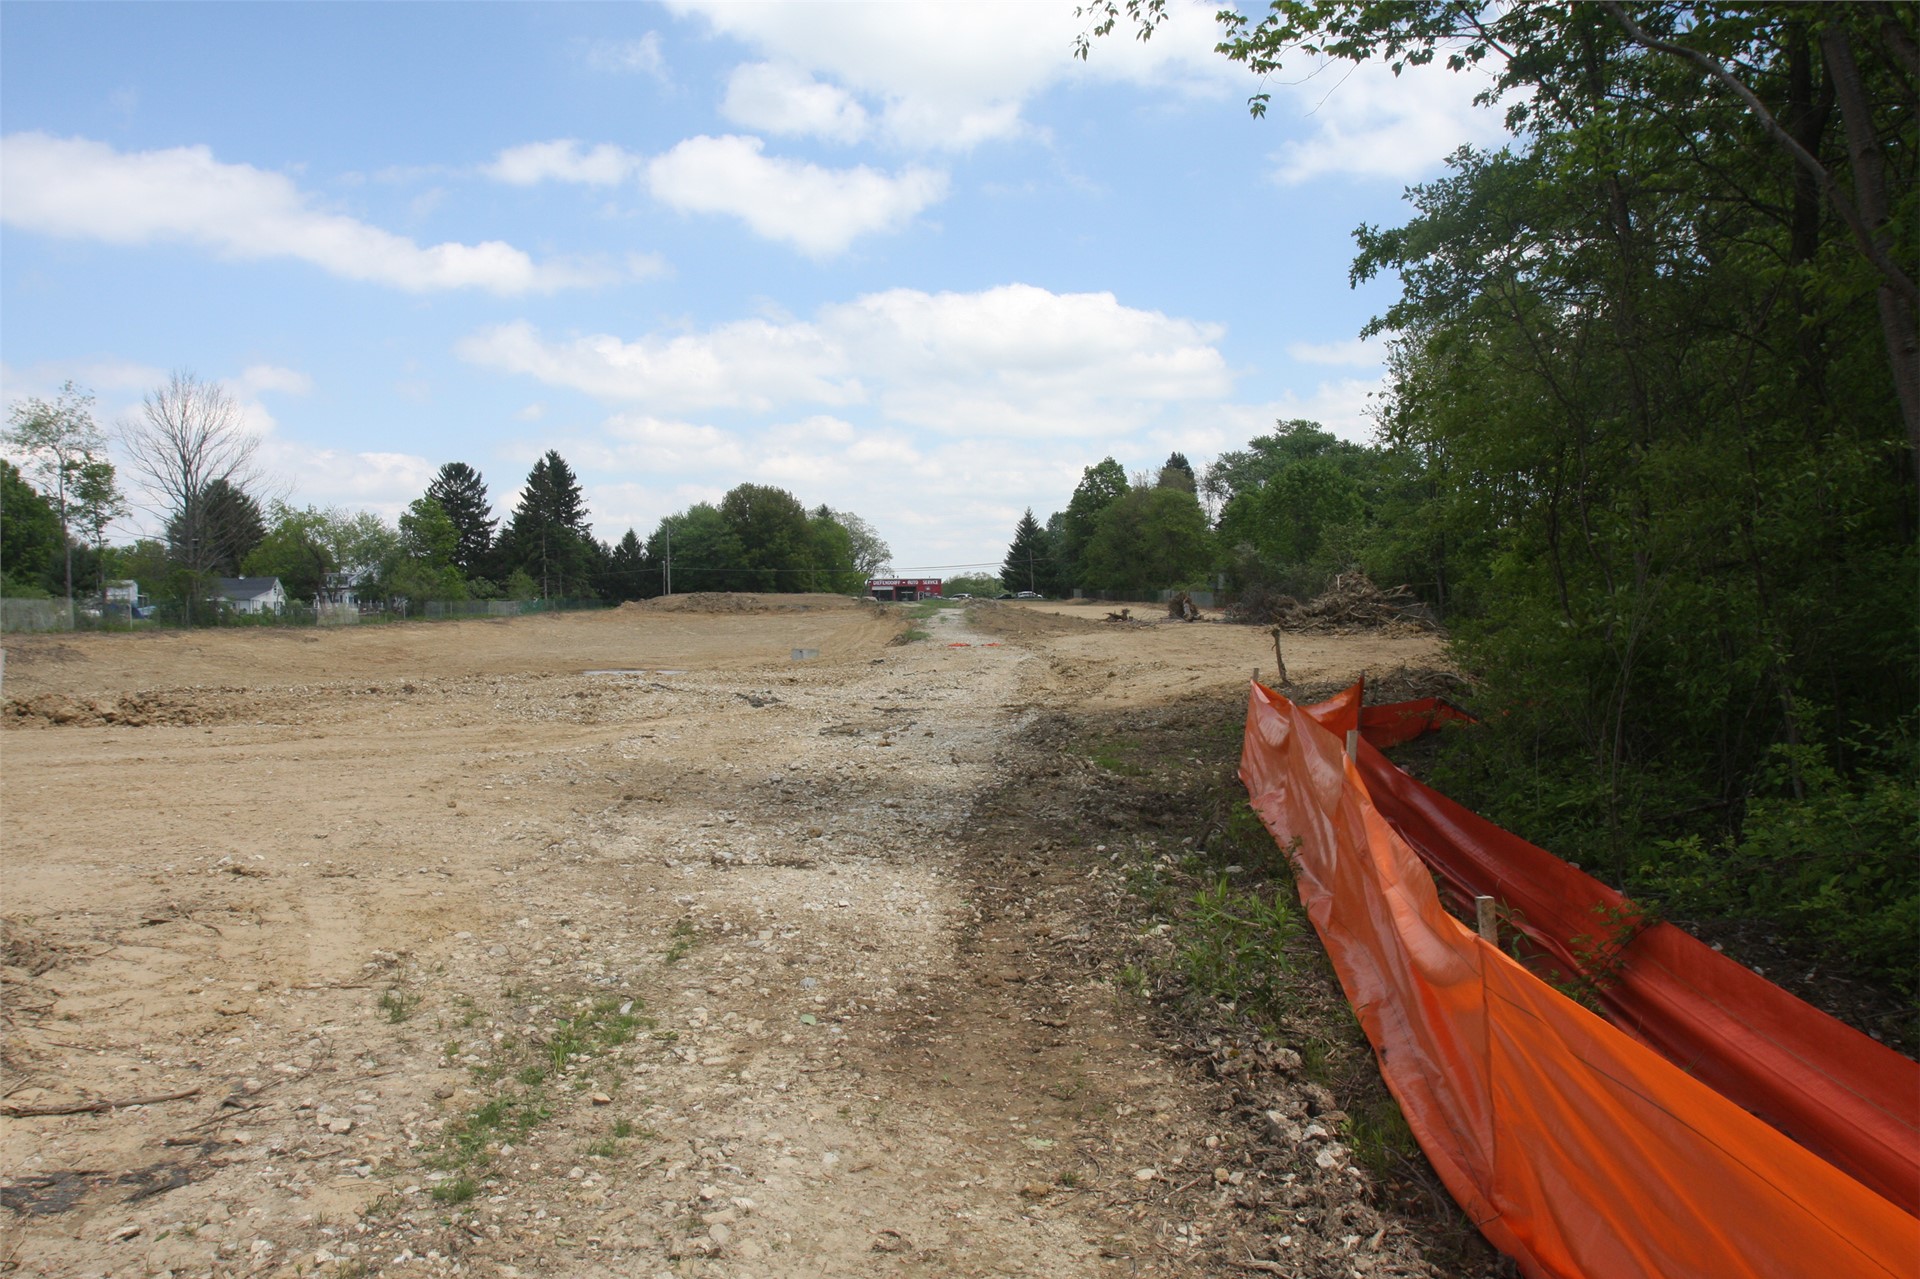 Zoomed out image of retention basin (left) and main drive way (right) with Diefendorff Auto Service 